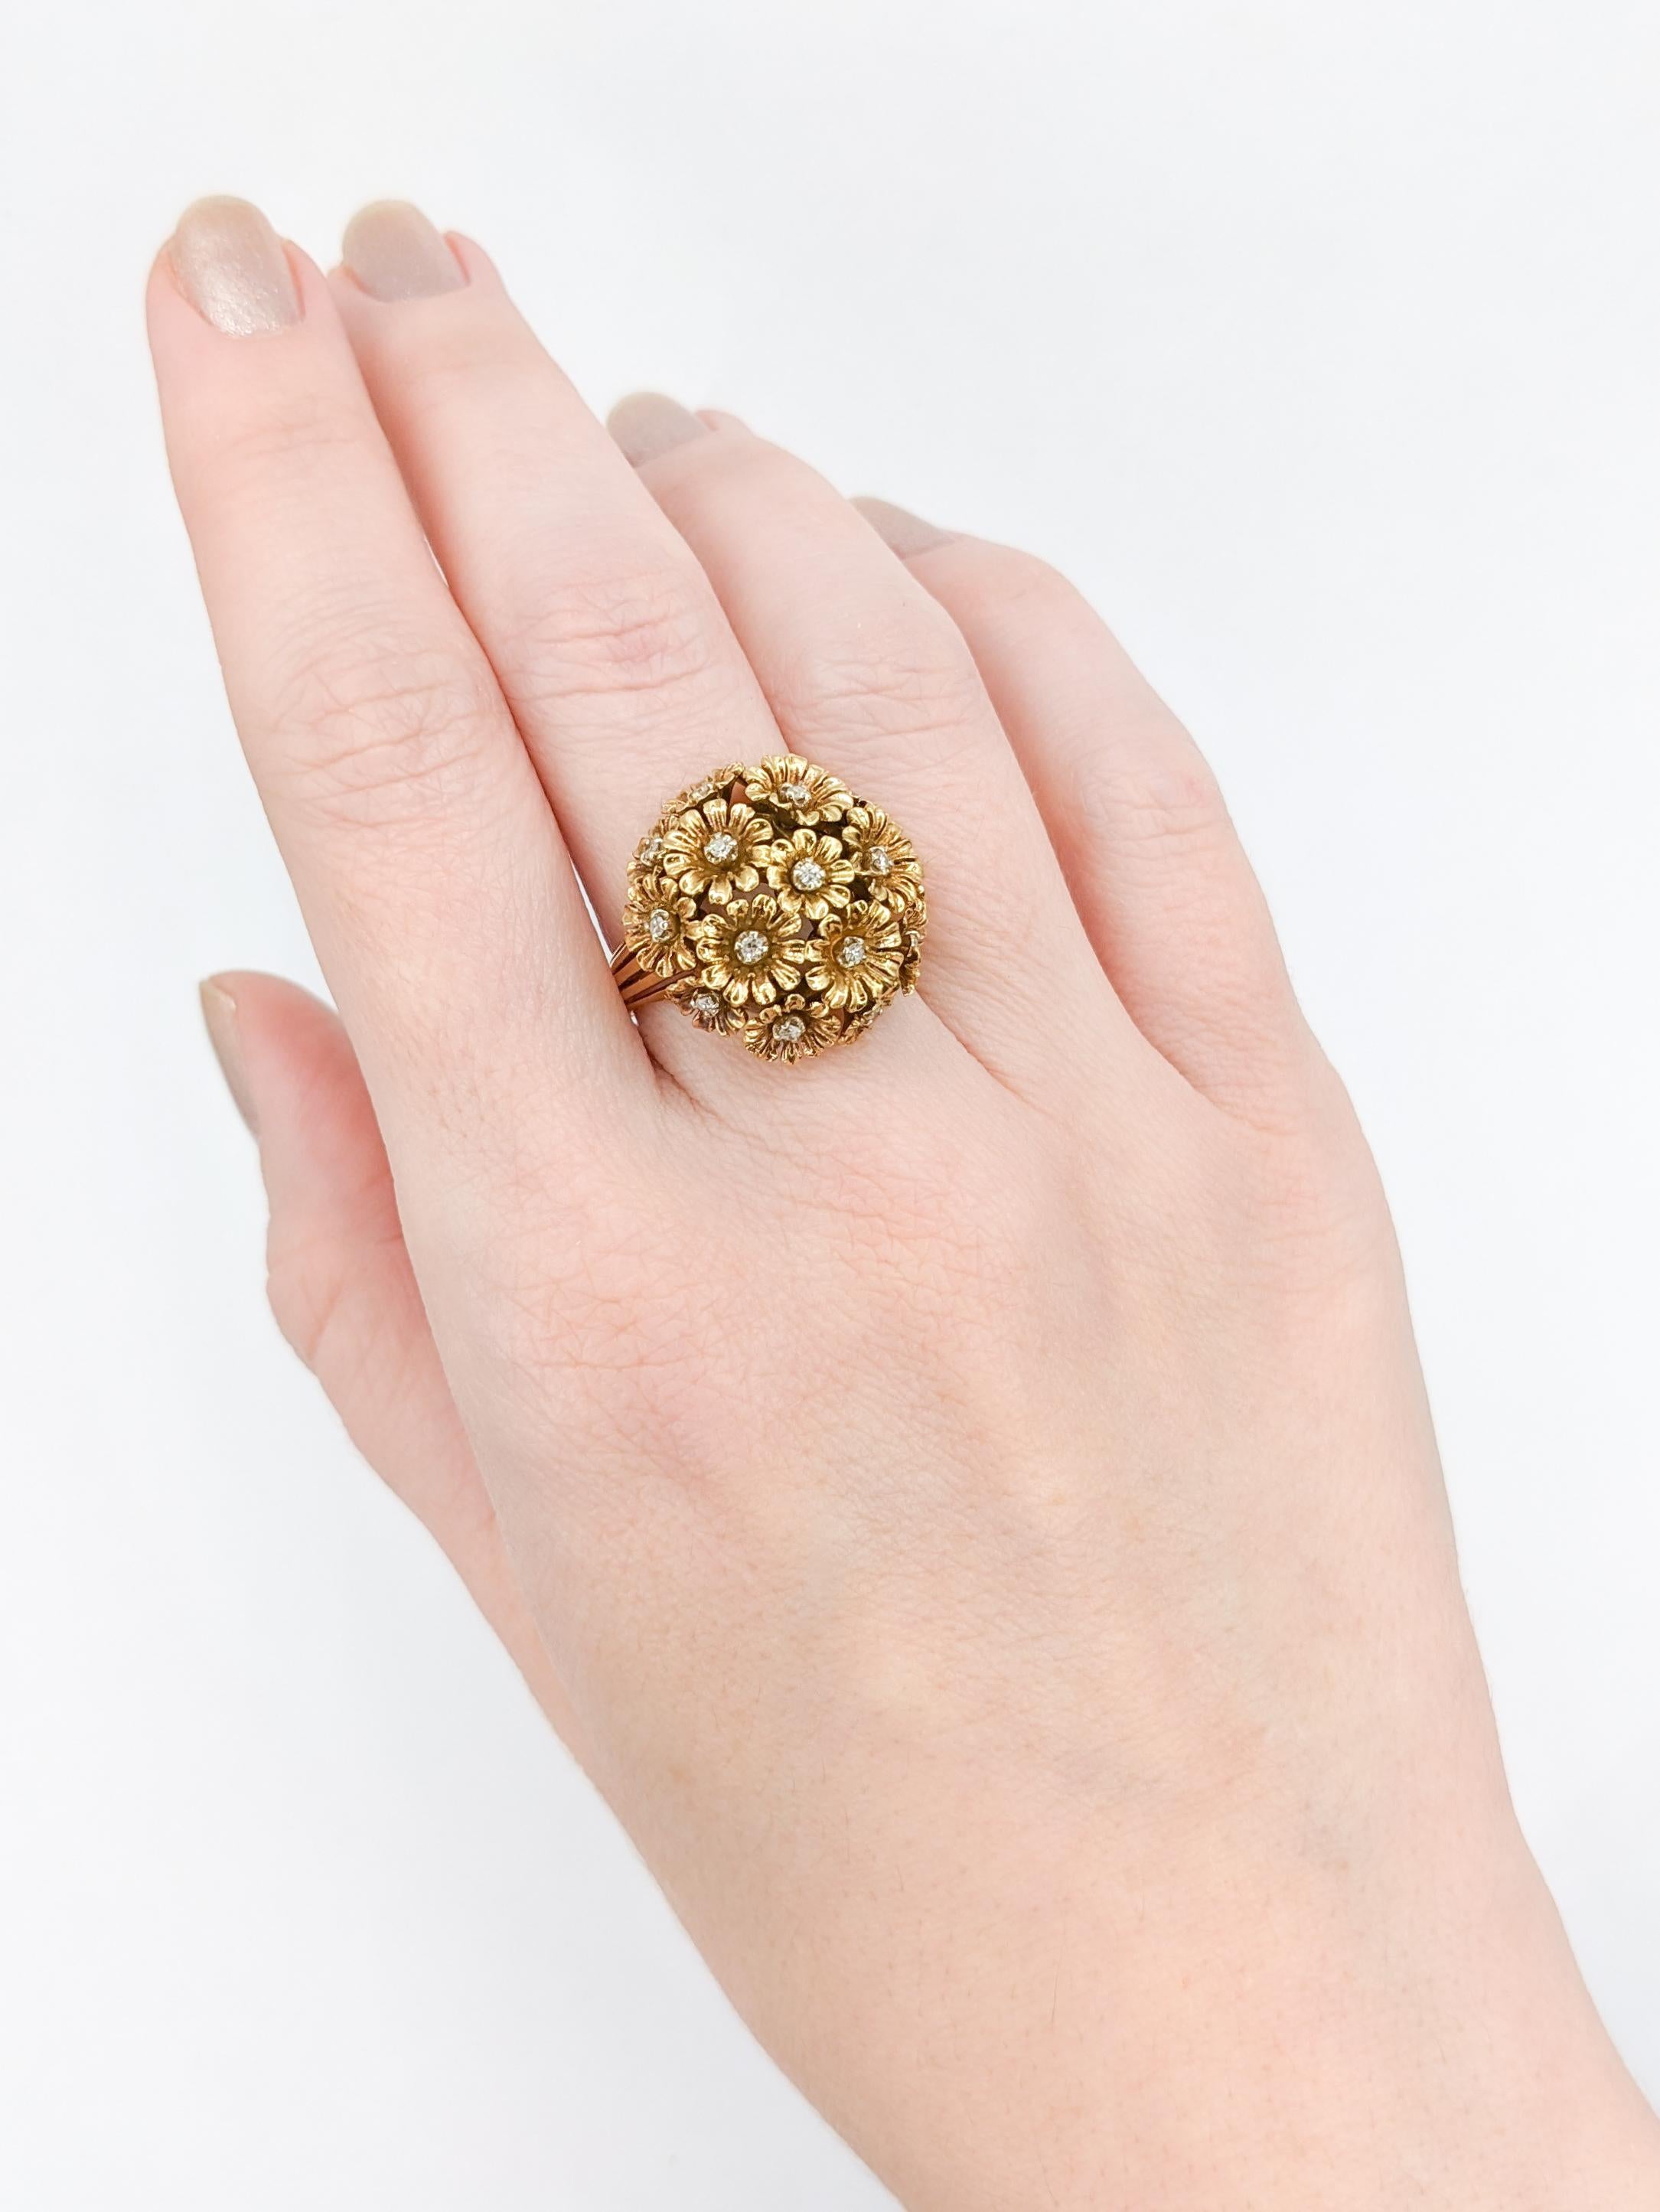 Whimsical Tremblant Flower Cluster Diamond Ring in 18K Gold

Delve into the elegance of yesteryears with this wonderful and unique Vintage Tremblant Ring. Masterfully fashioned in 18 karat Yellow Gold, this statement piece is accentuated with .24ctw